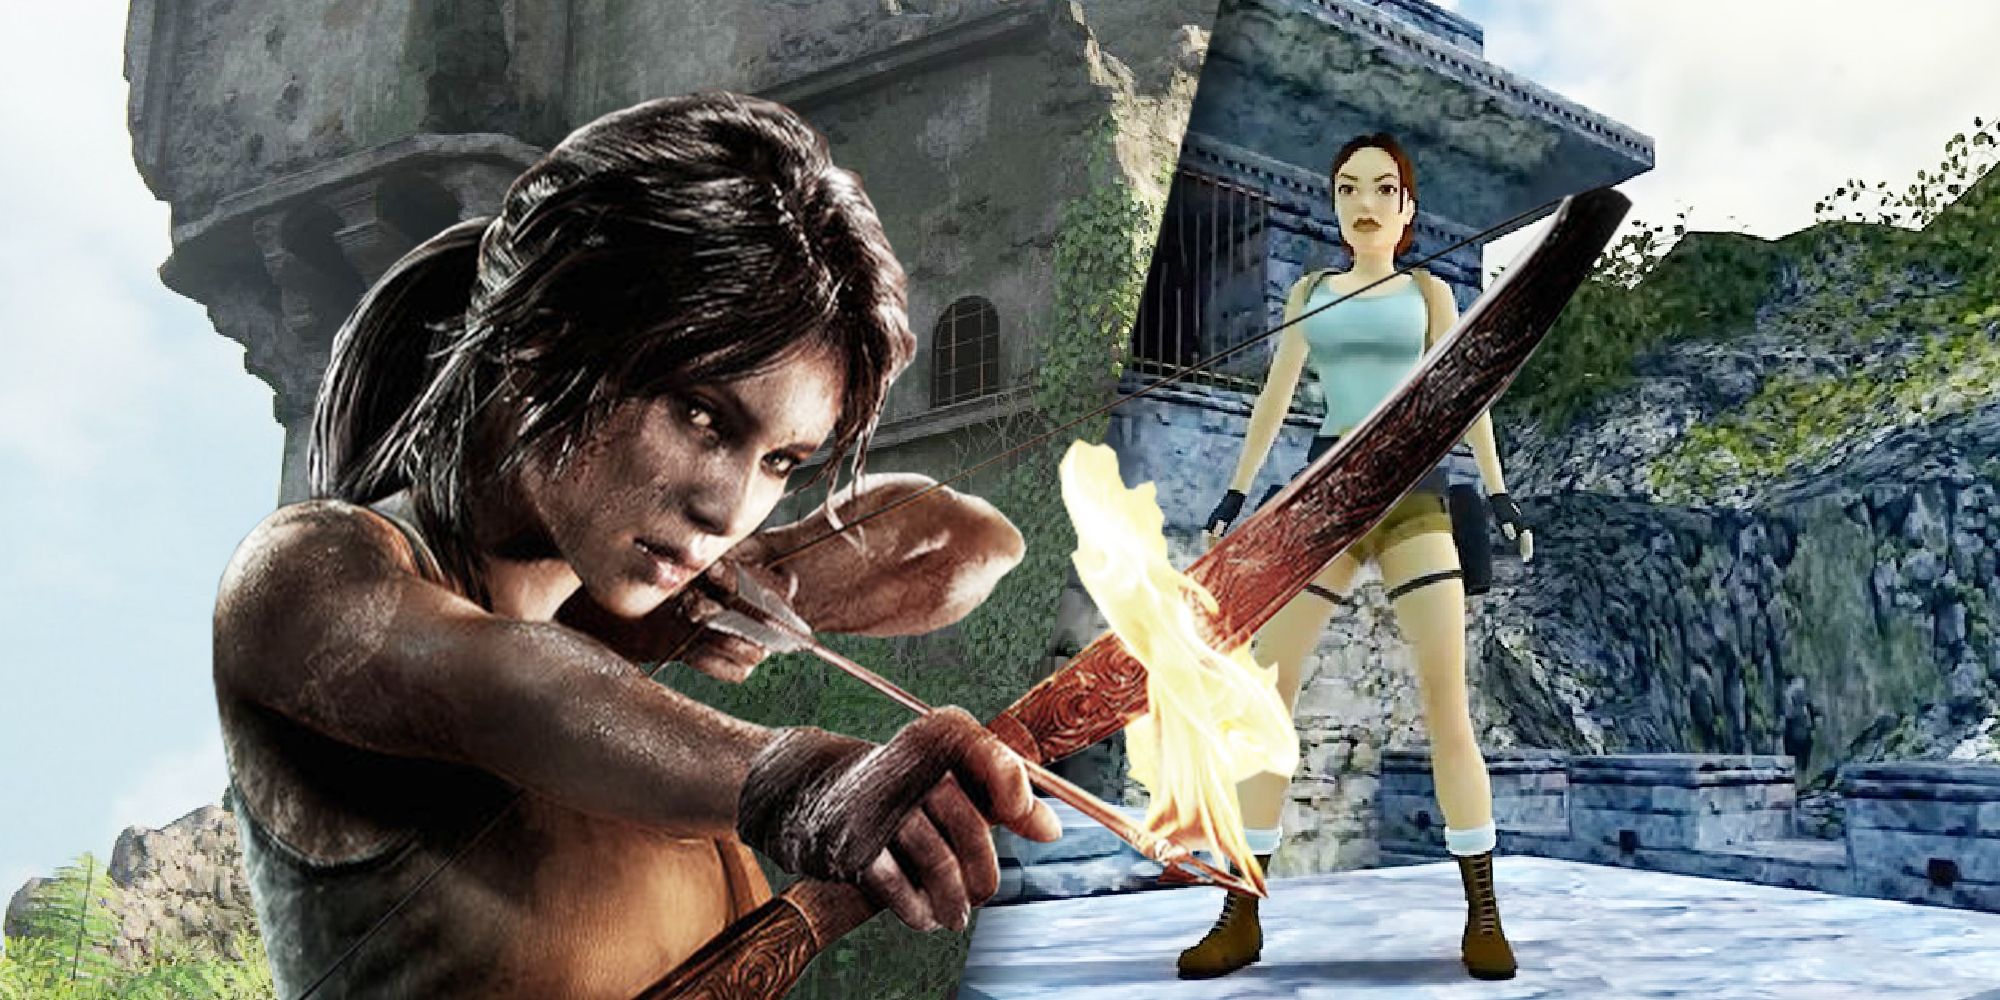 I'm Glad Tomb Raider Doesn't Look Like A Full Remake